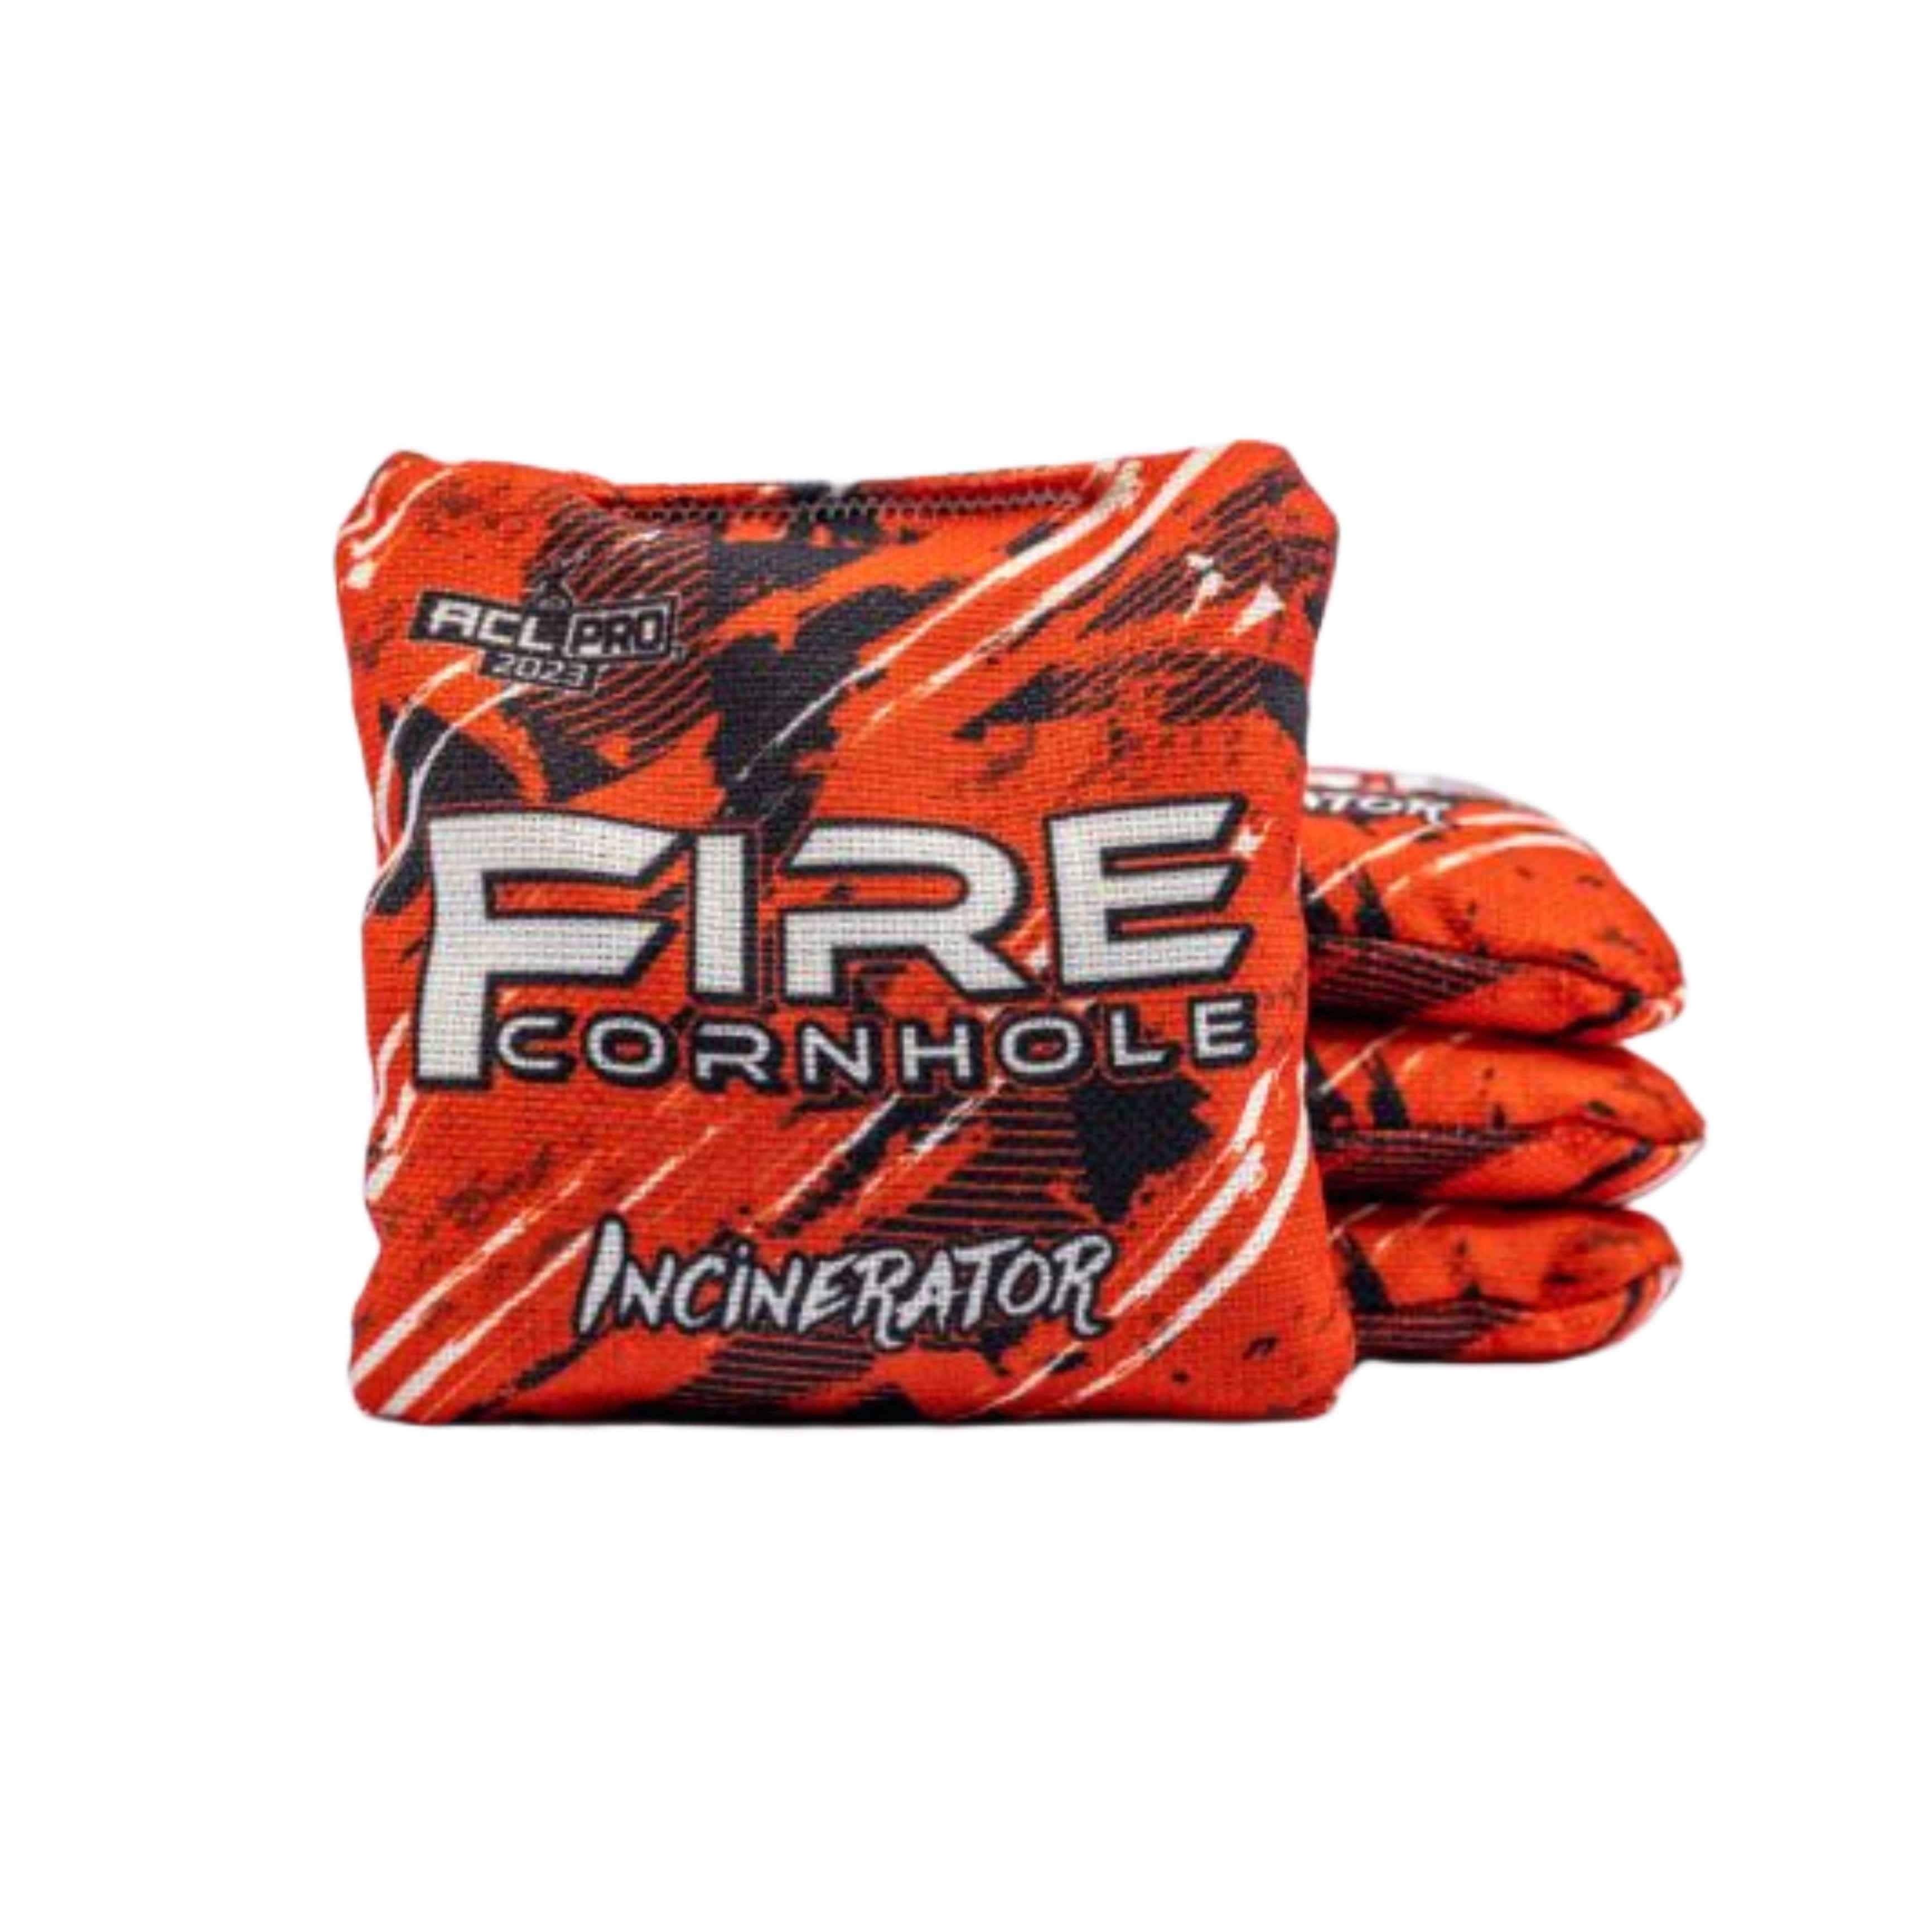 Fire Incinerator ACL cornhole bags in red